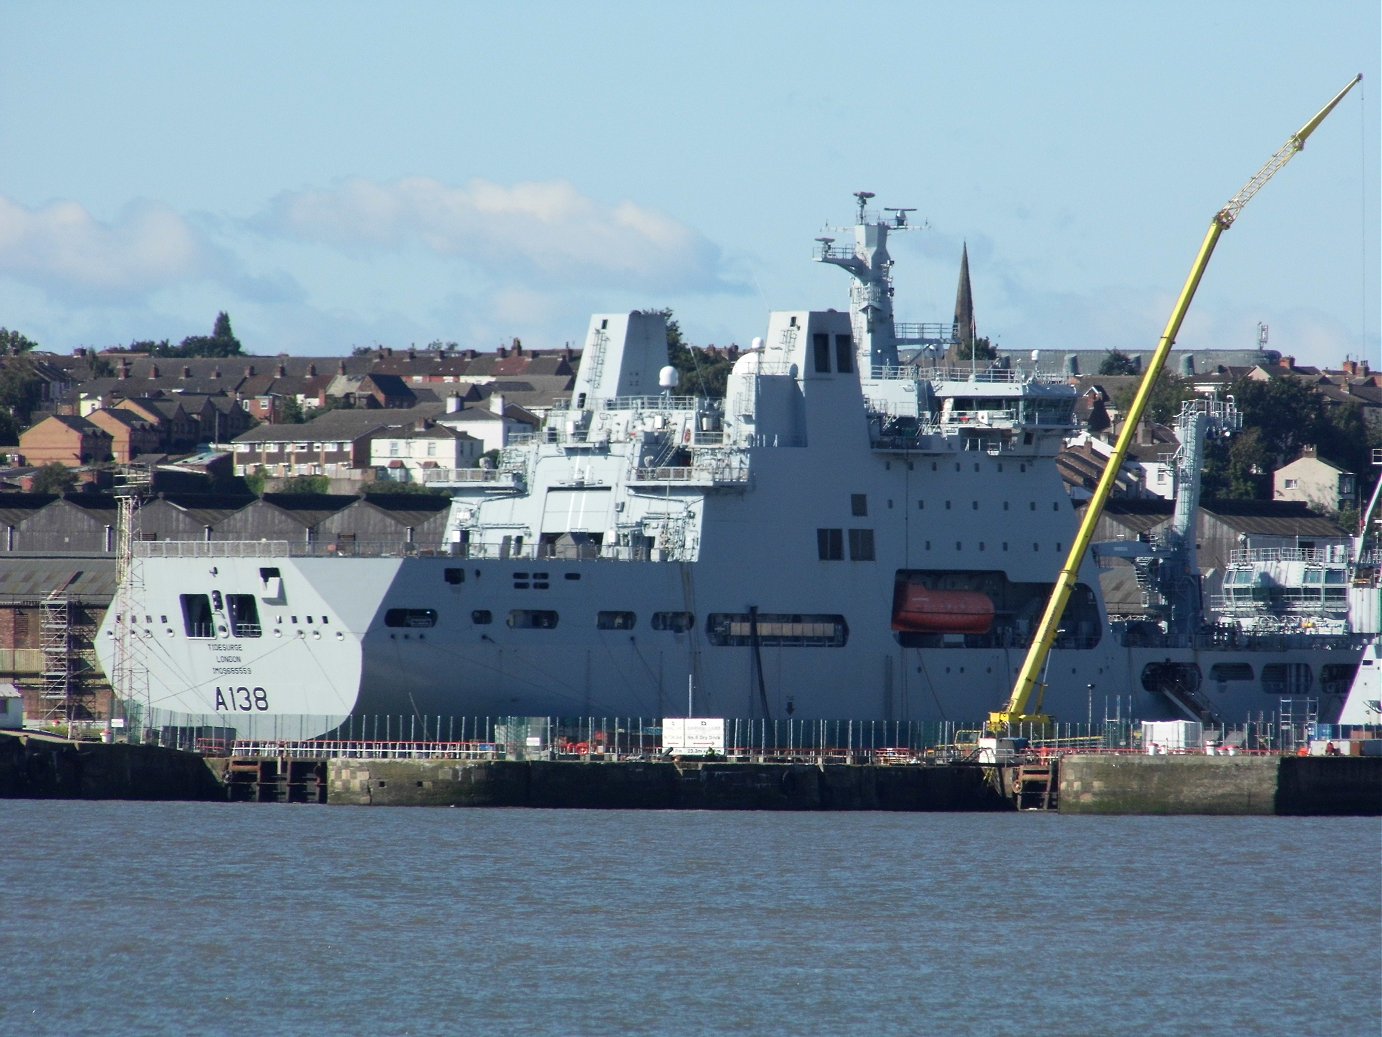 A138 RFA Tide Surge at Cammell Laird shipyard 30 August 2020.